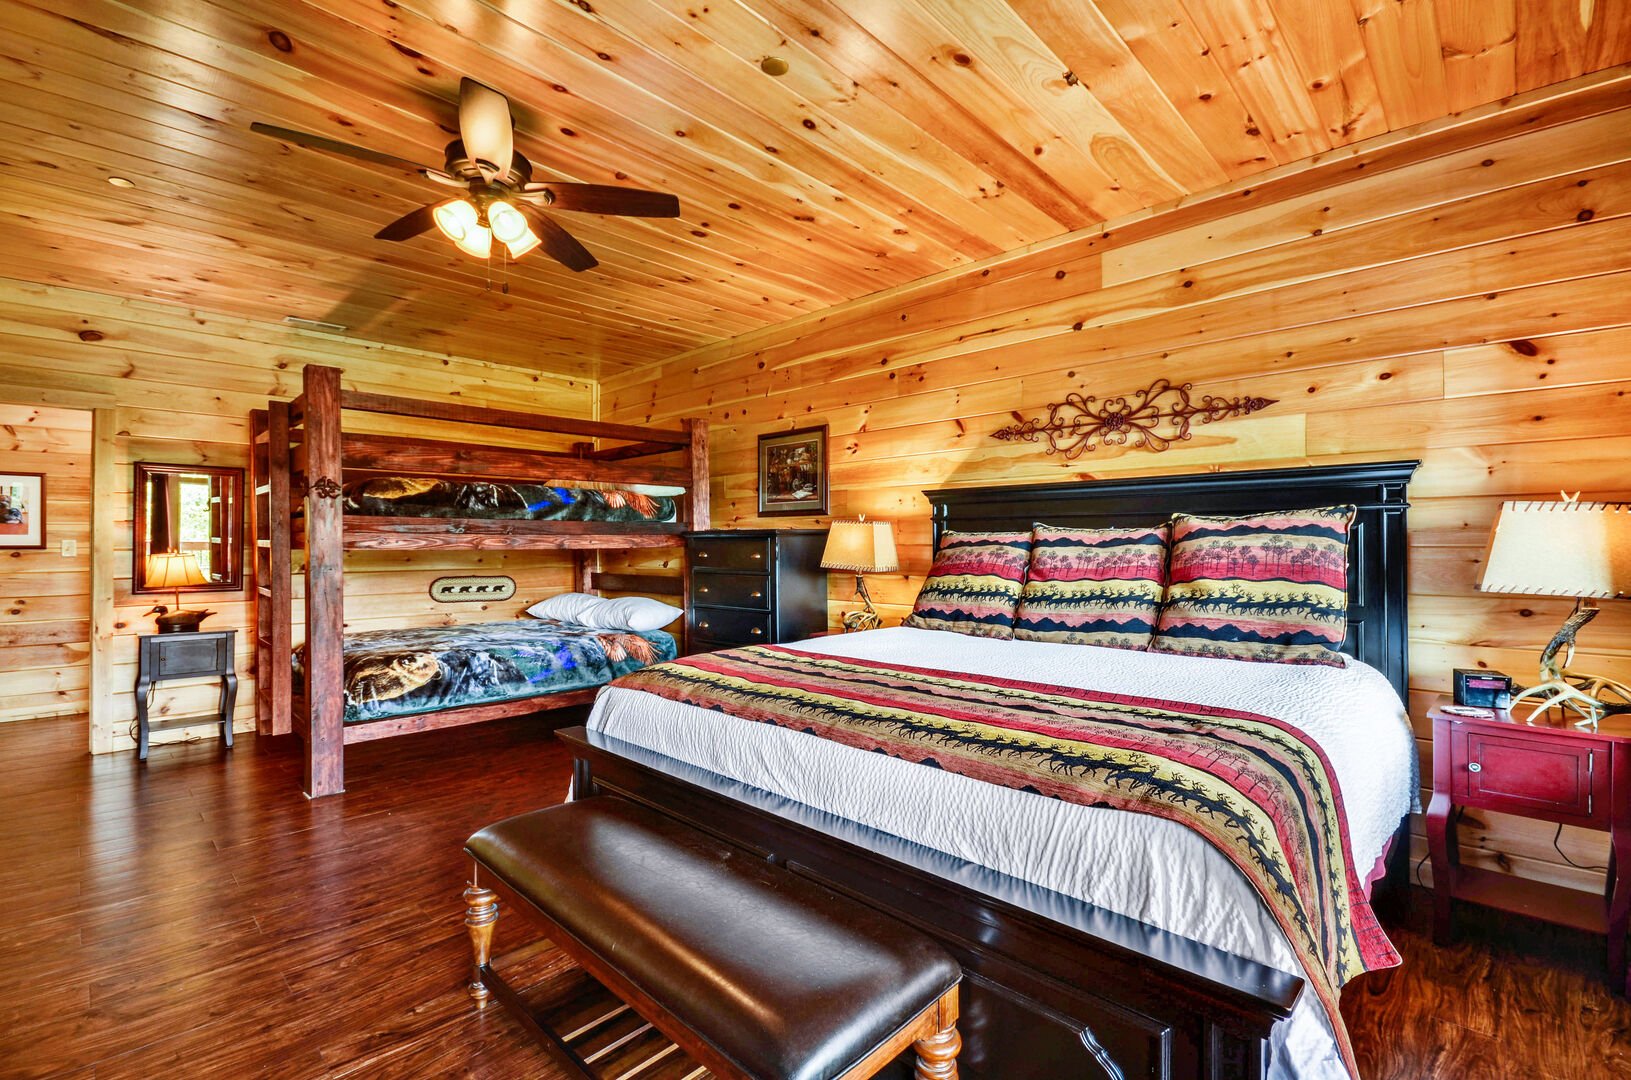 Full bed and bunk bed in a bedroom, with dressers and nightstands beside them.